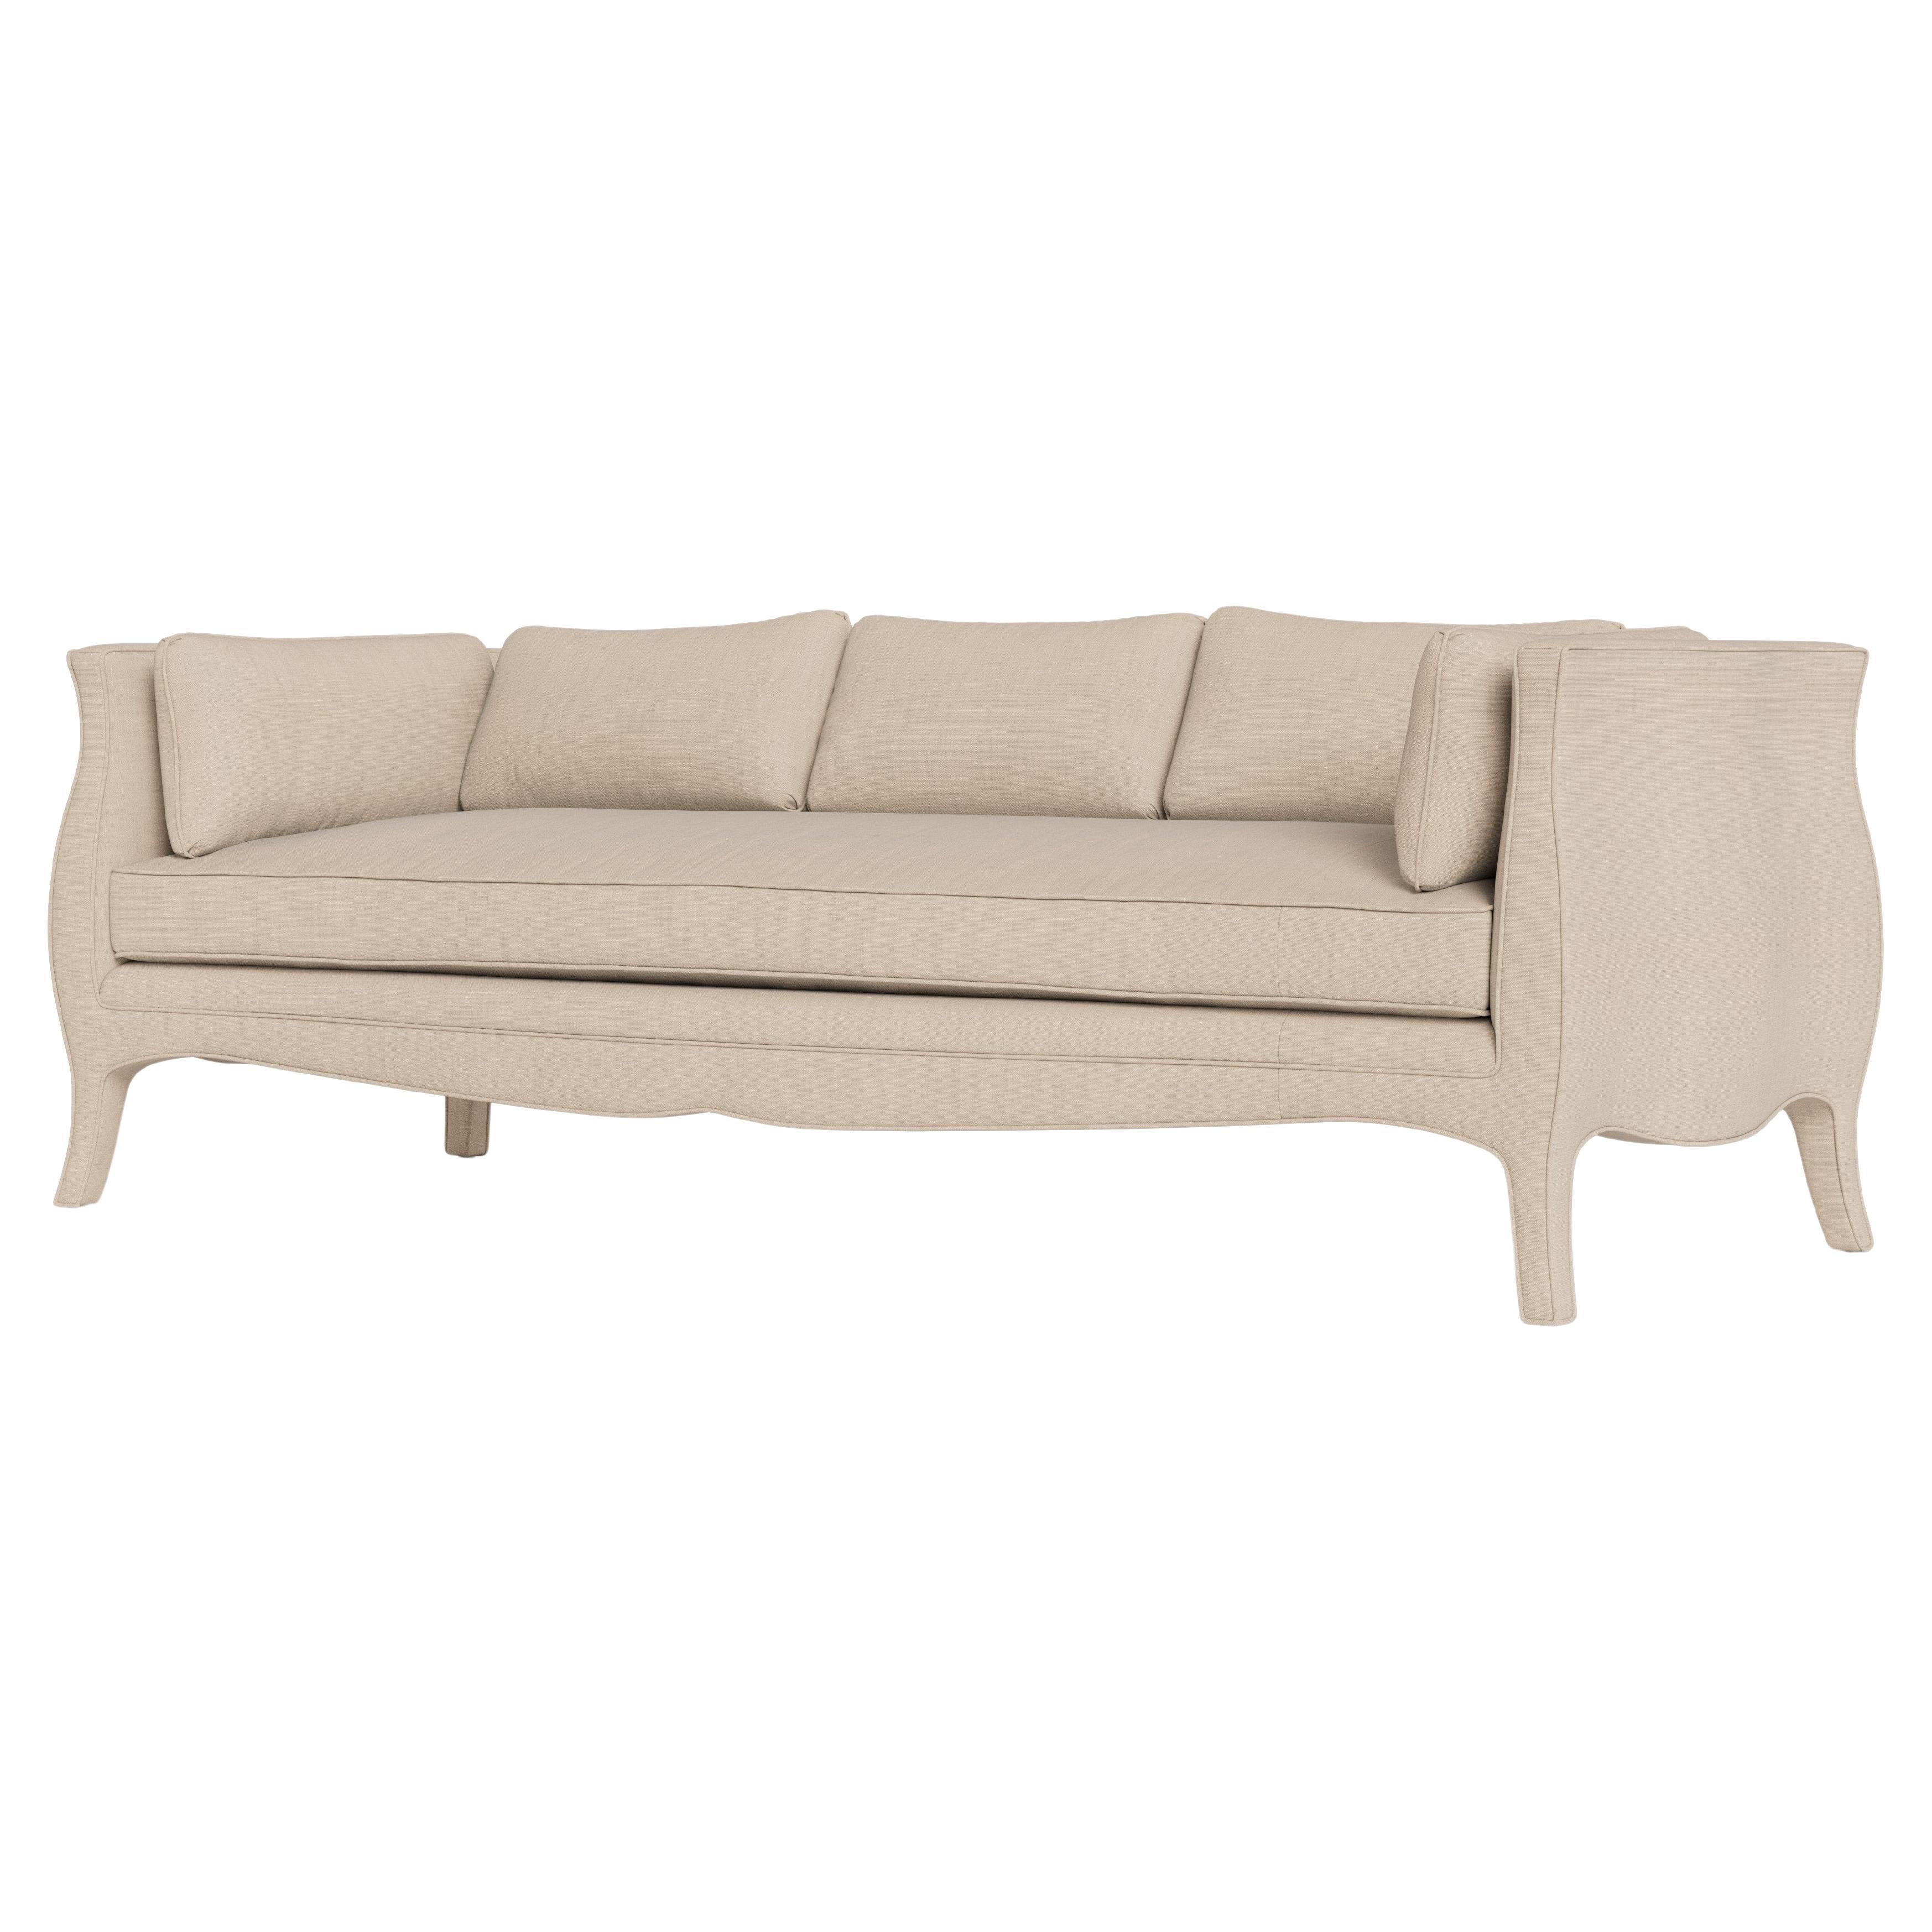 Bunny Williams Home Southern Belle Sofa 82", Solid Performance Linen/Sand For Sale